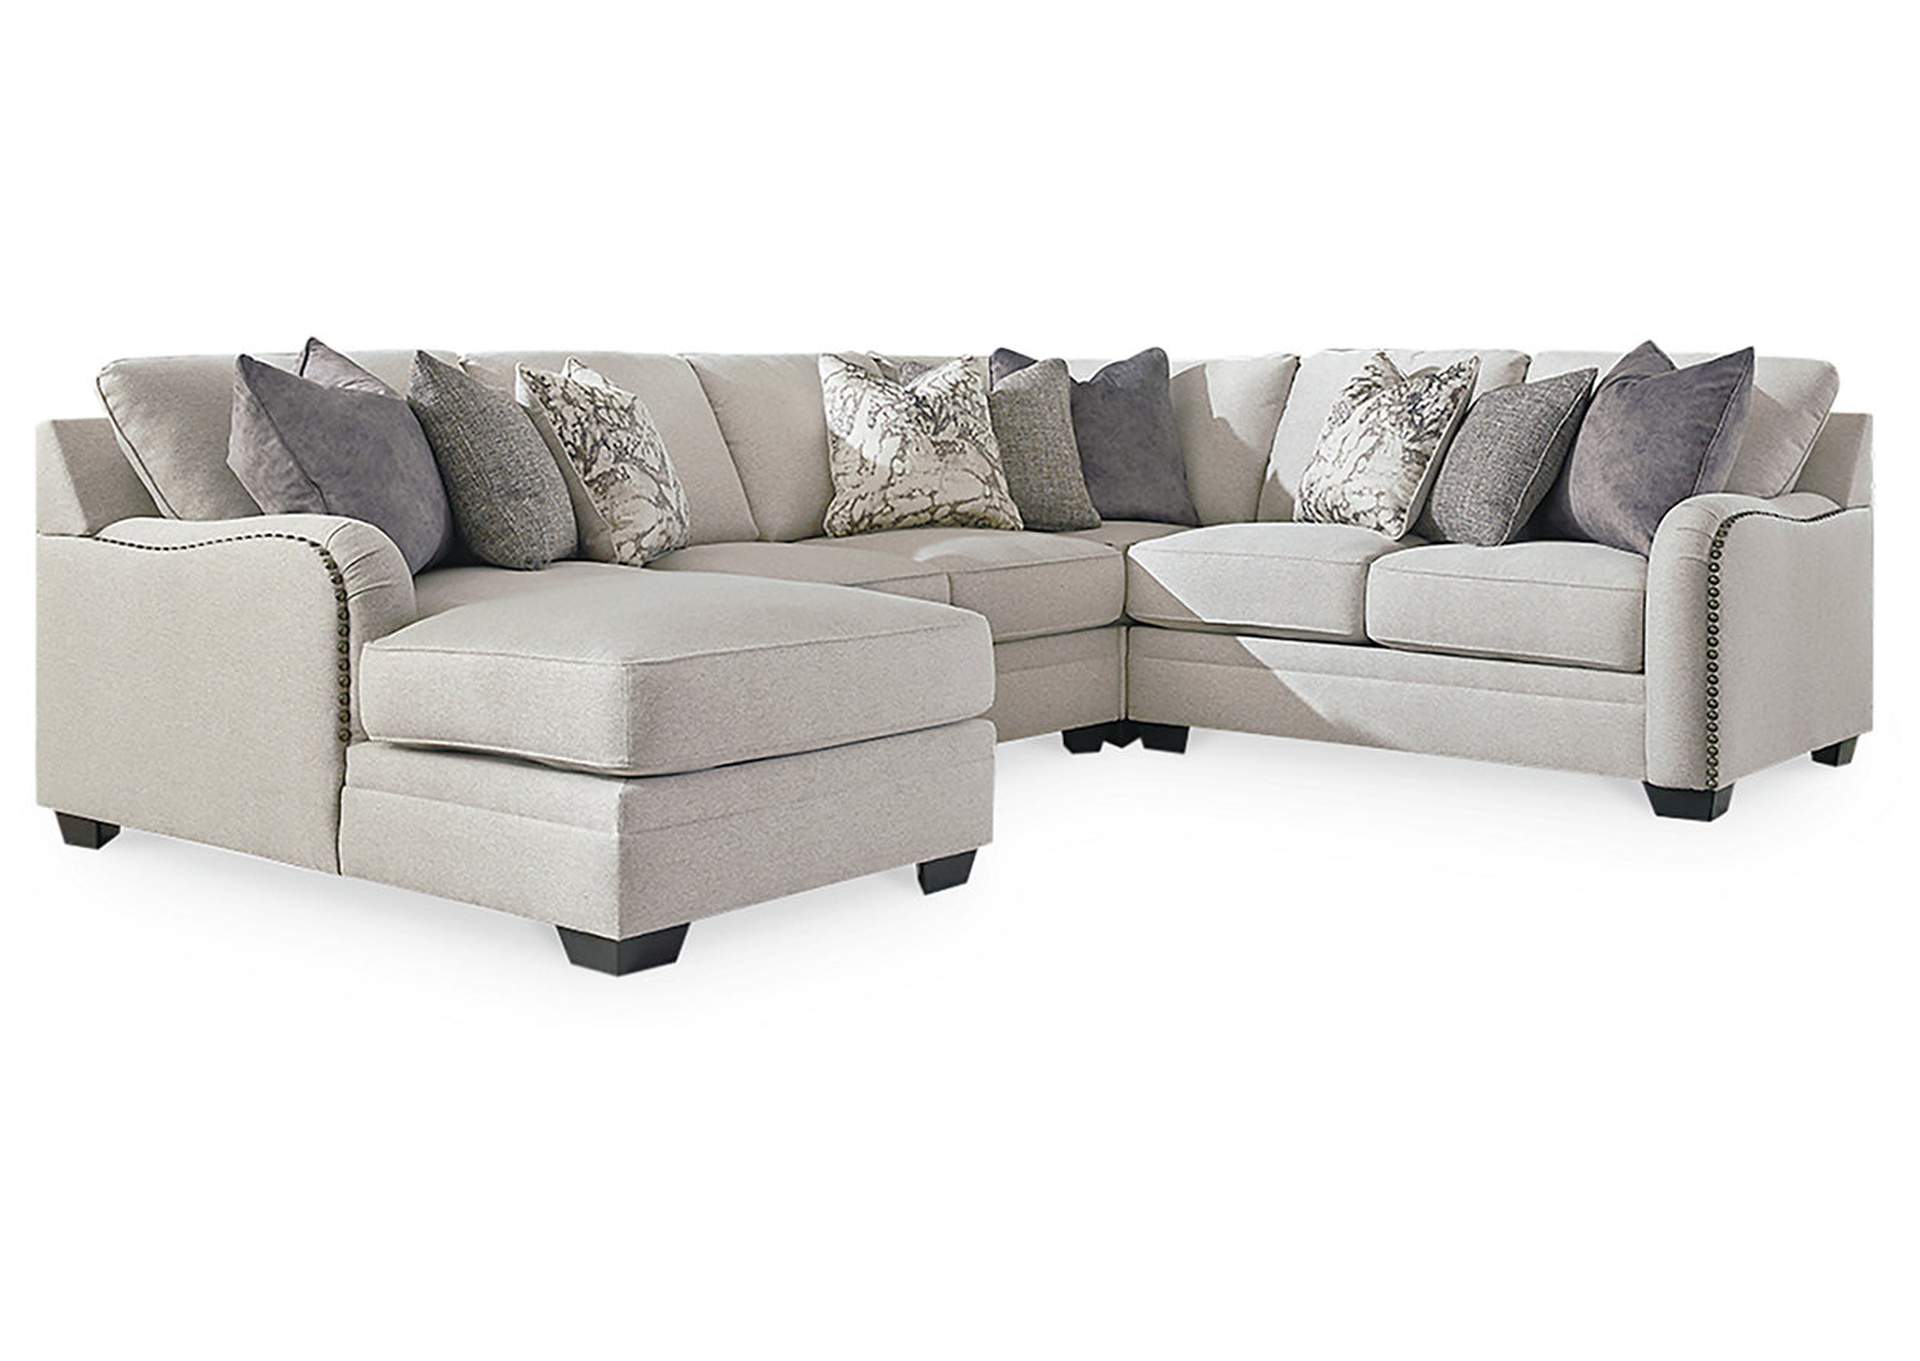 Dellara 4-Piece Sectional with Chaise,Benchcraft